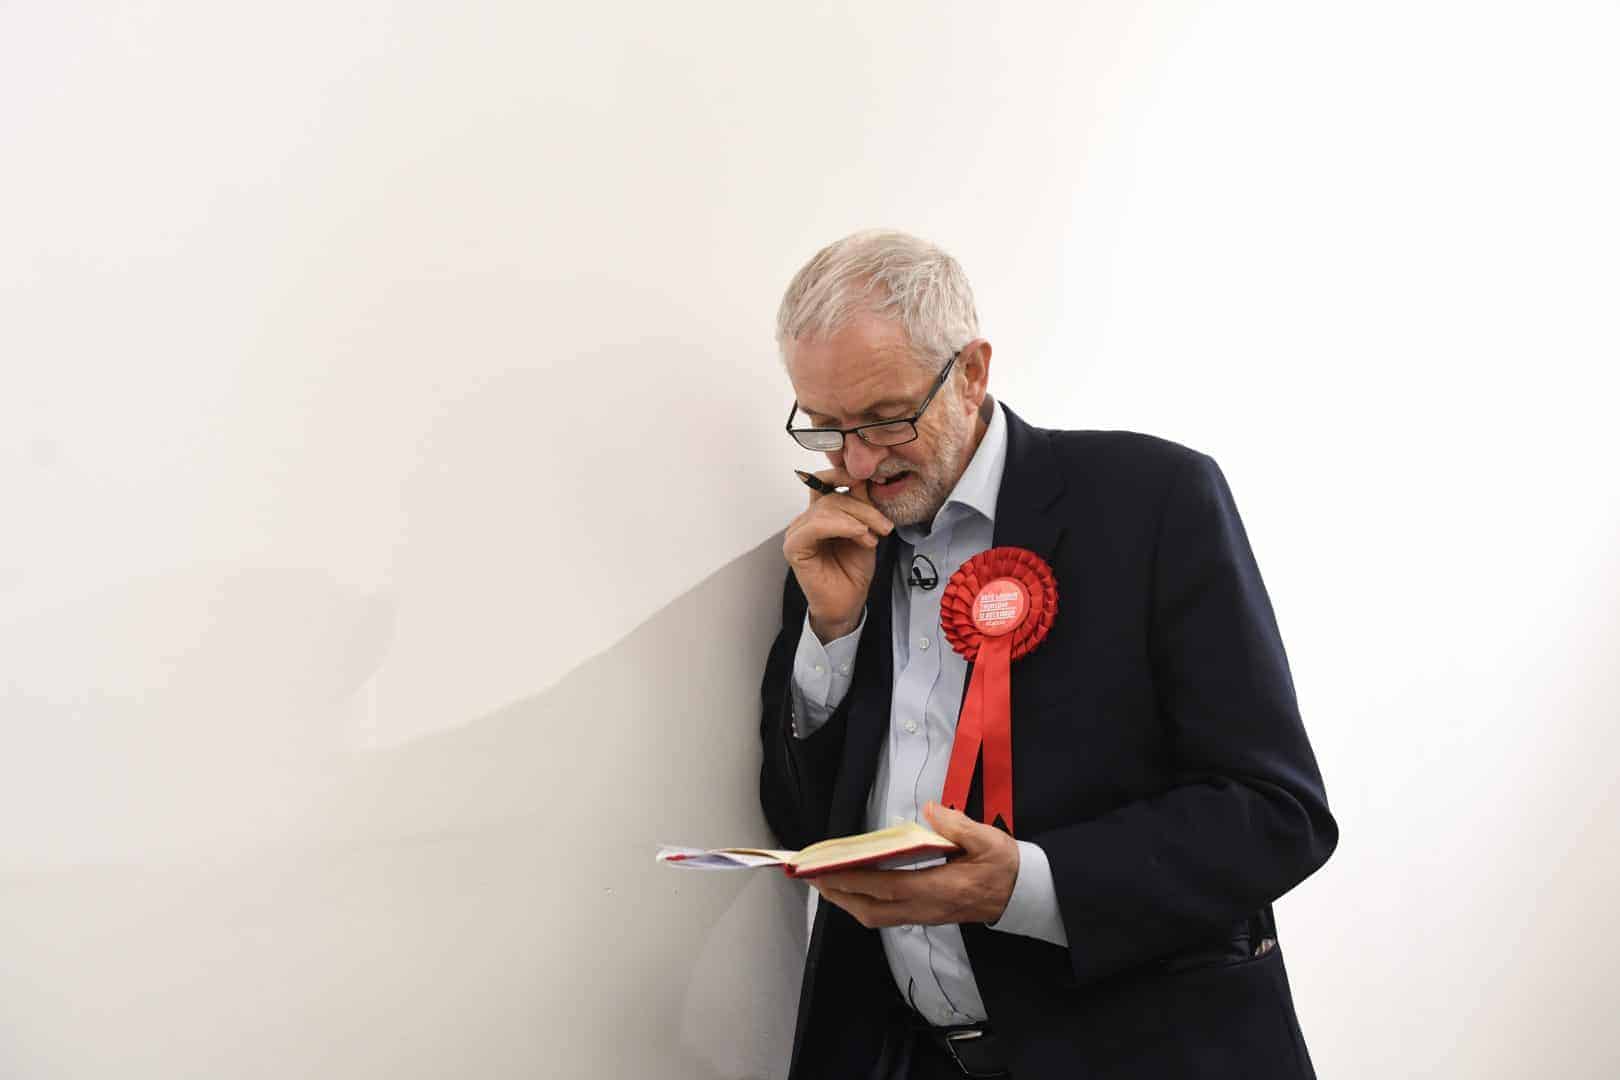 Jeremy Corbyn’s election day revelation about his past isn’t quite what it seems